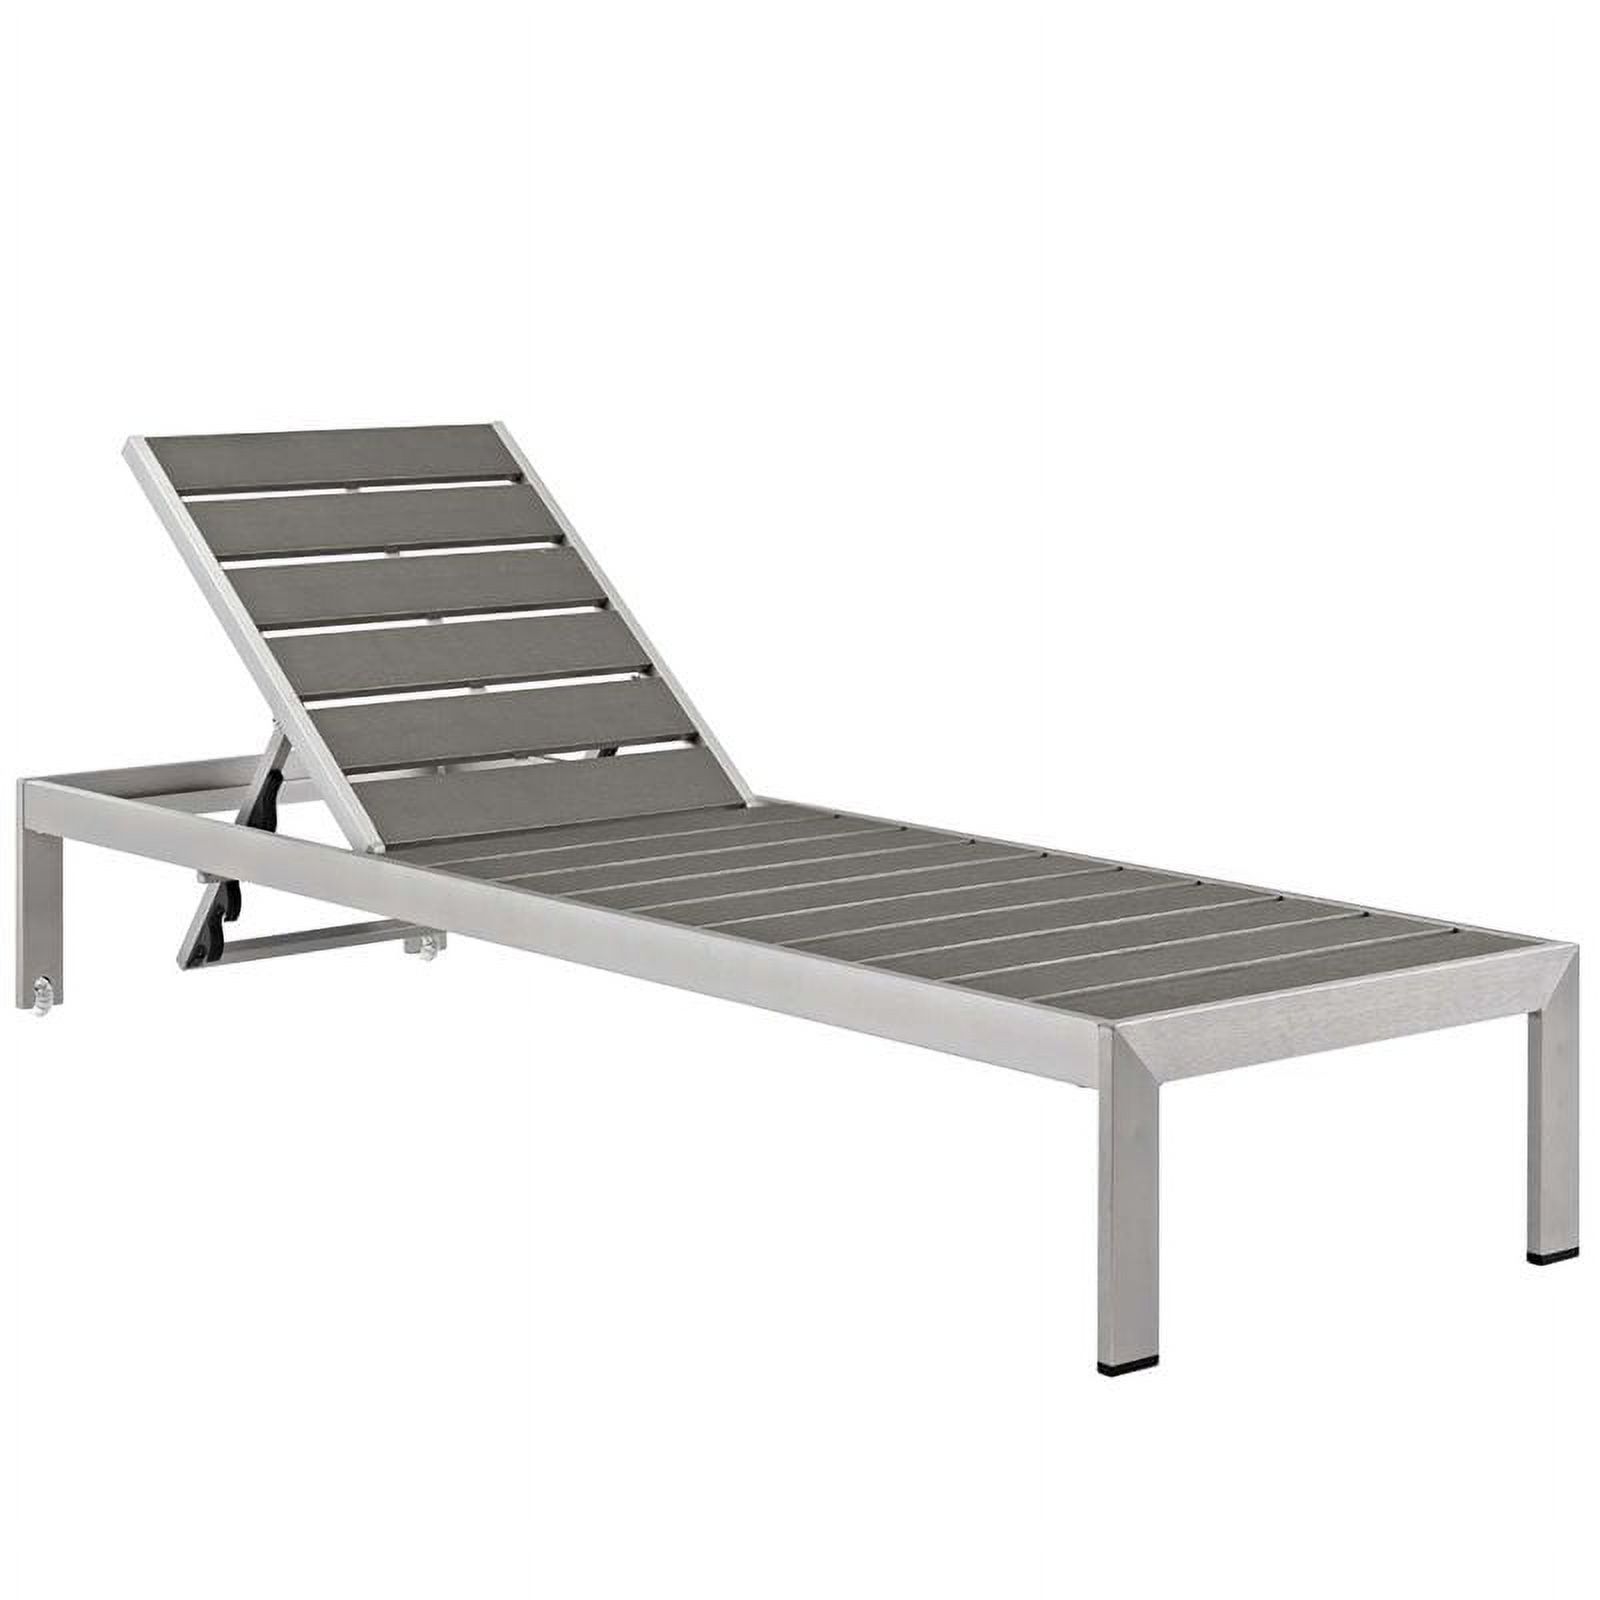 Pemberly Row  Plastic Wood Reclining Patio Chaise Lounge in Silver and Mocha - image 4 of 4